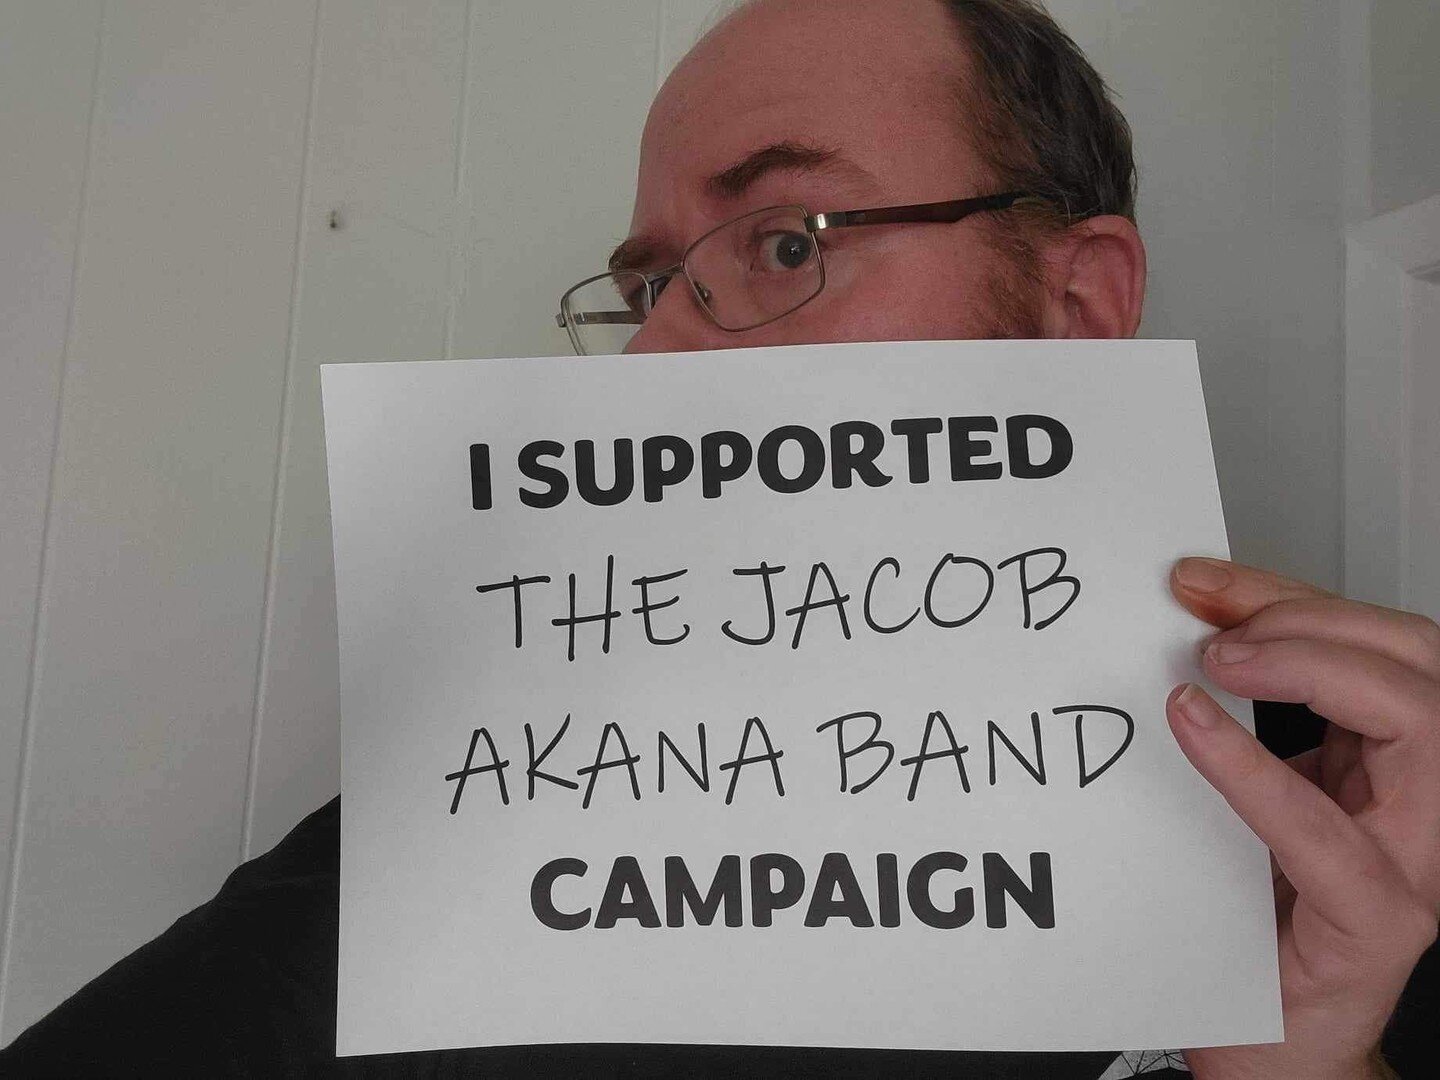 Big thank you to Jeffery Taylor for helping me raise funds to make my first studio album! We&rsquo;ve got 18 days left to hit the goal, so please help me keep the momentum going by checking out my campaign, sharing and getting the word out! Campaign 